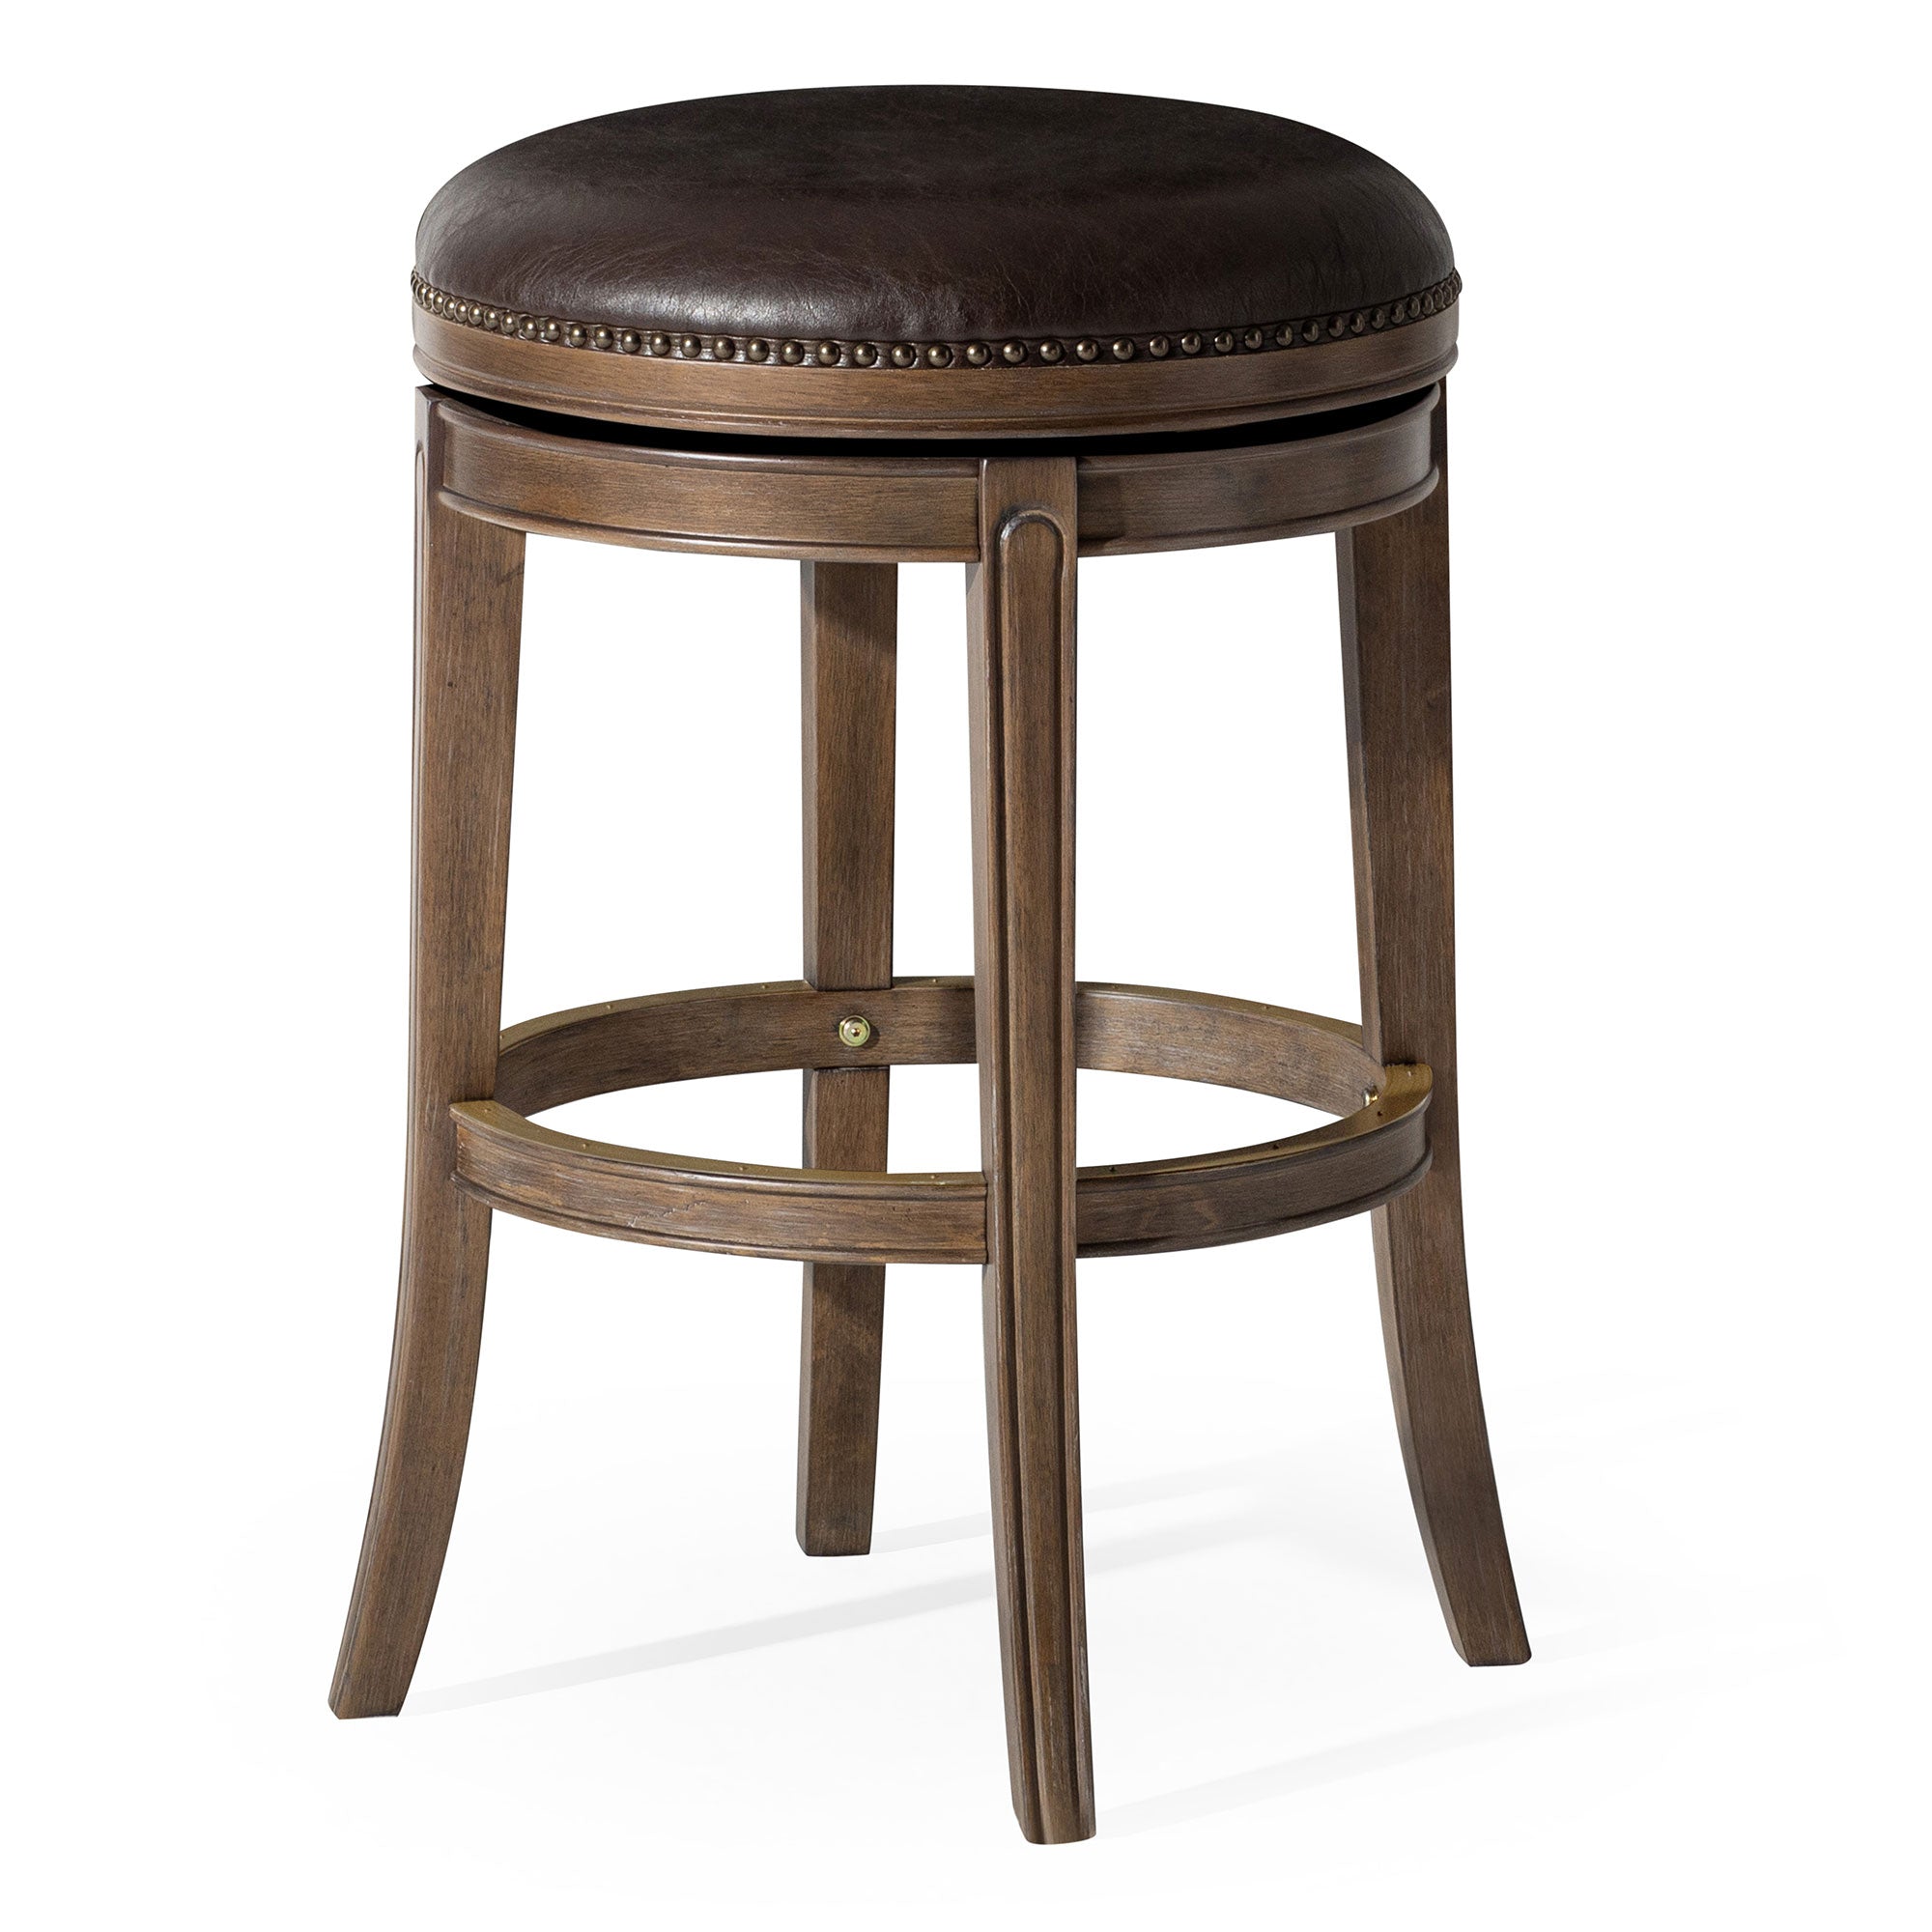 Alexander Backless Bar Stool in Walnut Finish with Marksman Saddle Vegan Leather in Stools by Maven Lane